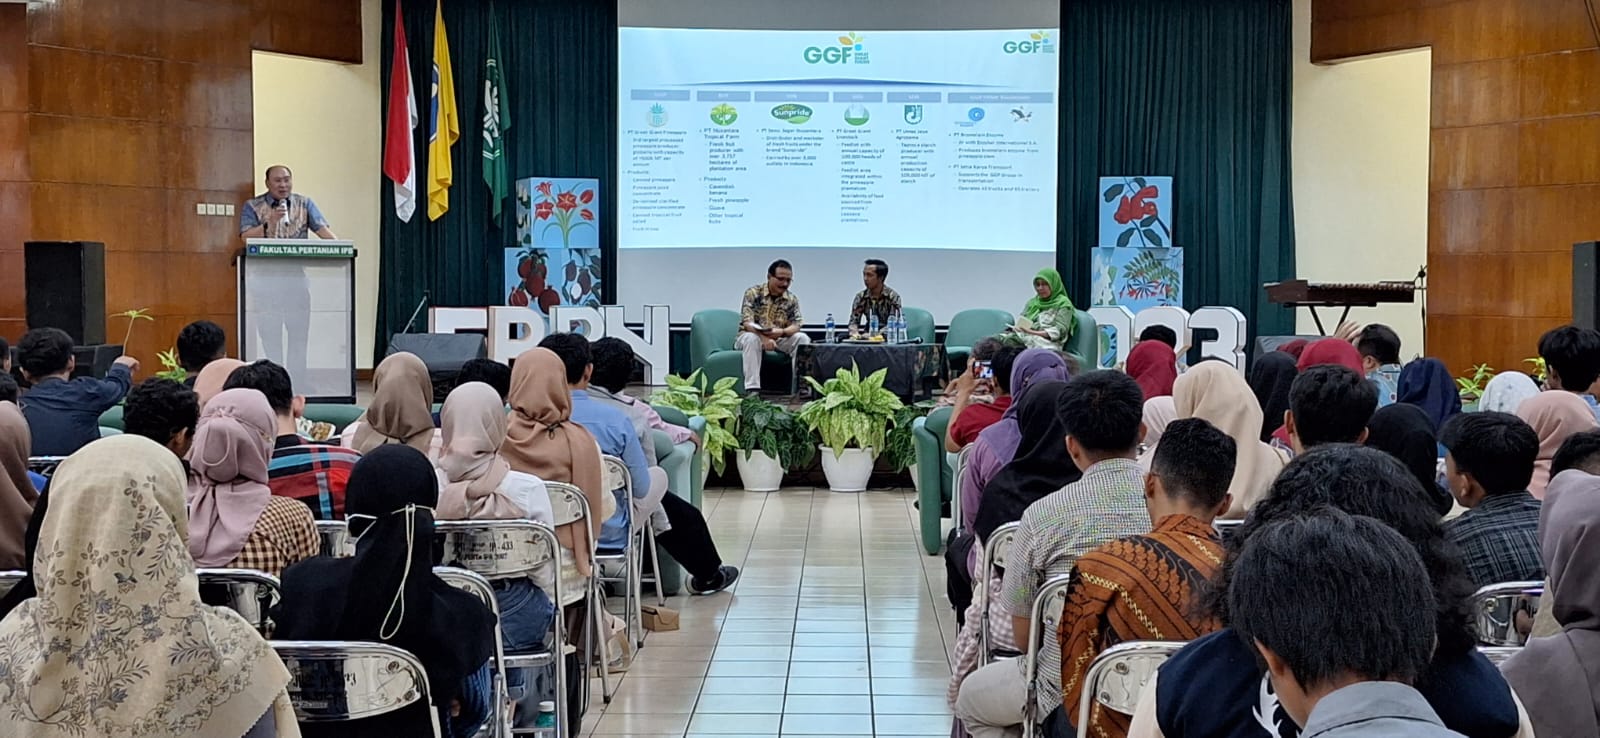 GGF Present at the National Seminar on the Indonesian Flower and Fruit Festival